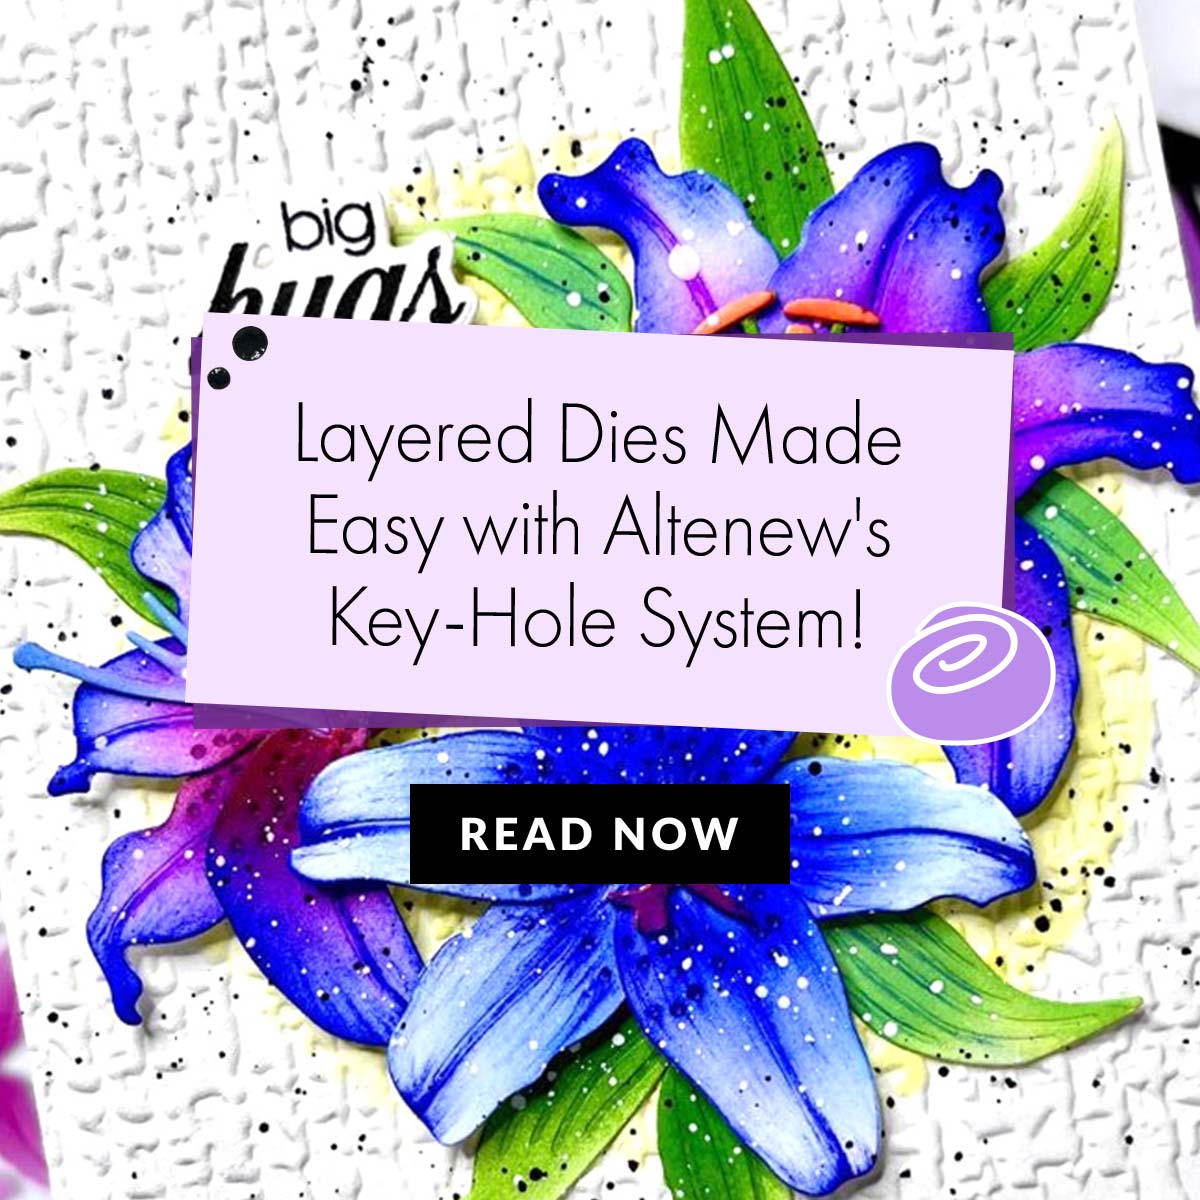 Get to Know Altenew's Key-Hole System for Layering Dies